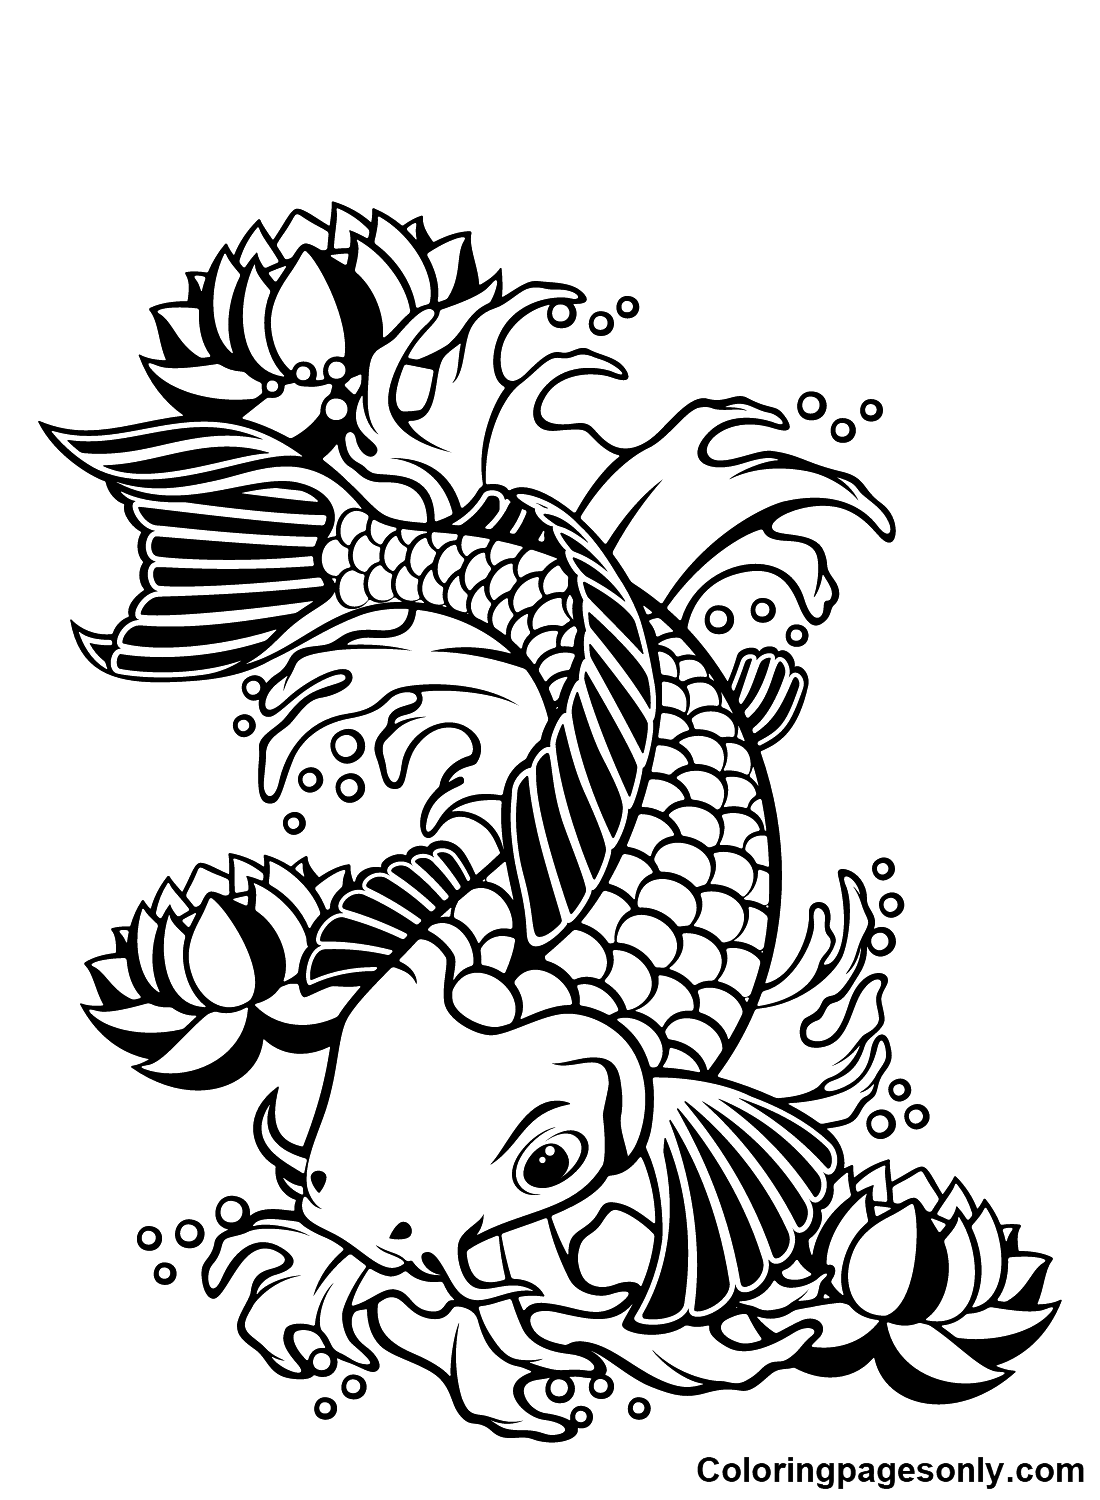 Tatto Koi Fish Coloring Pages